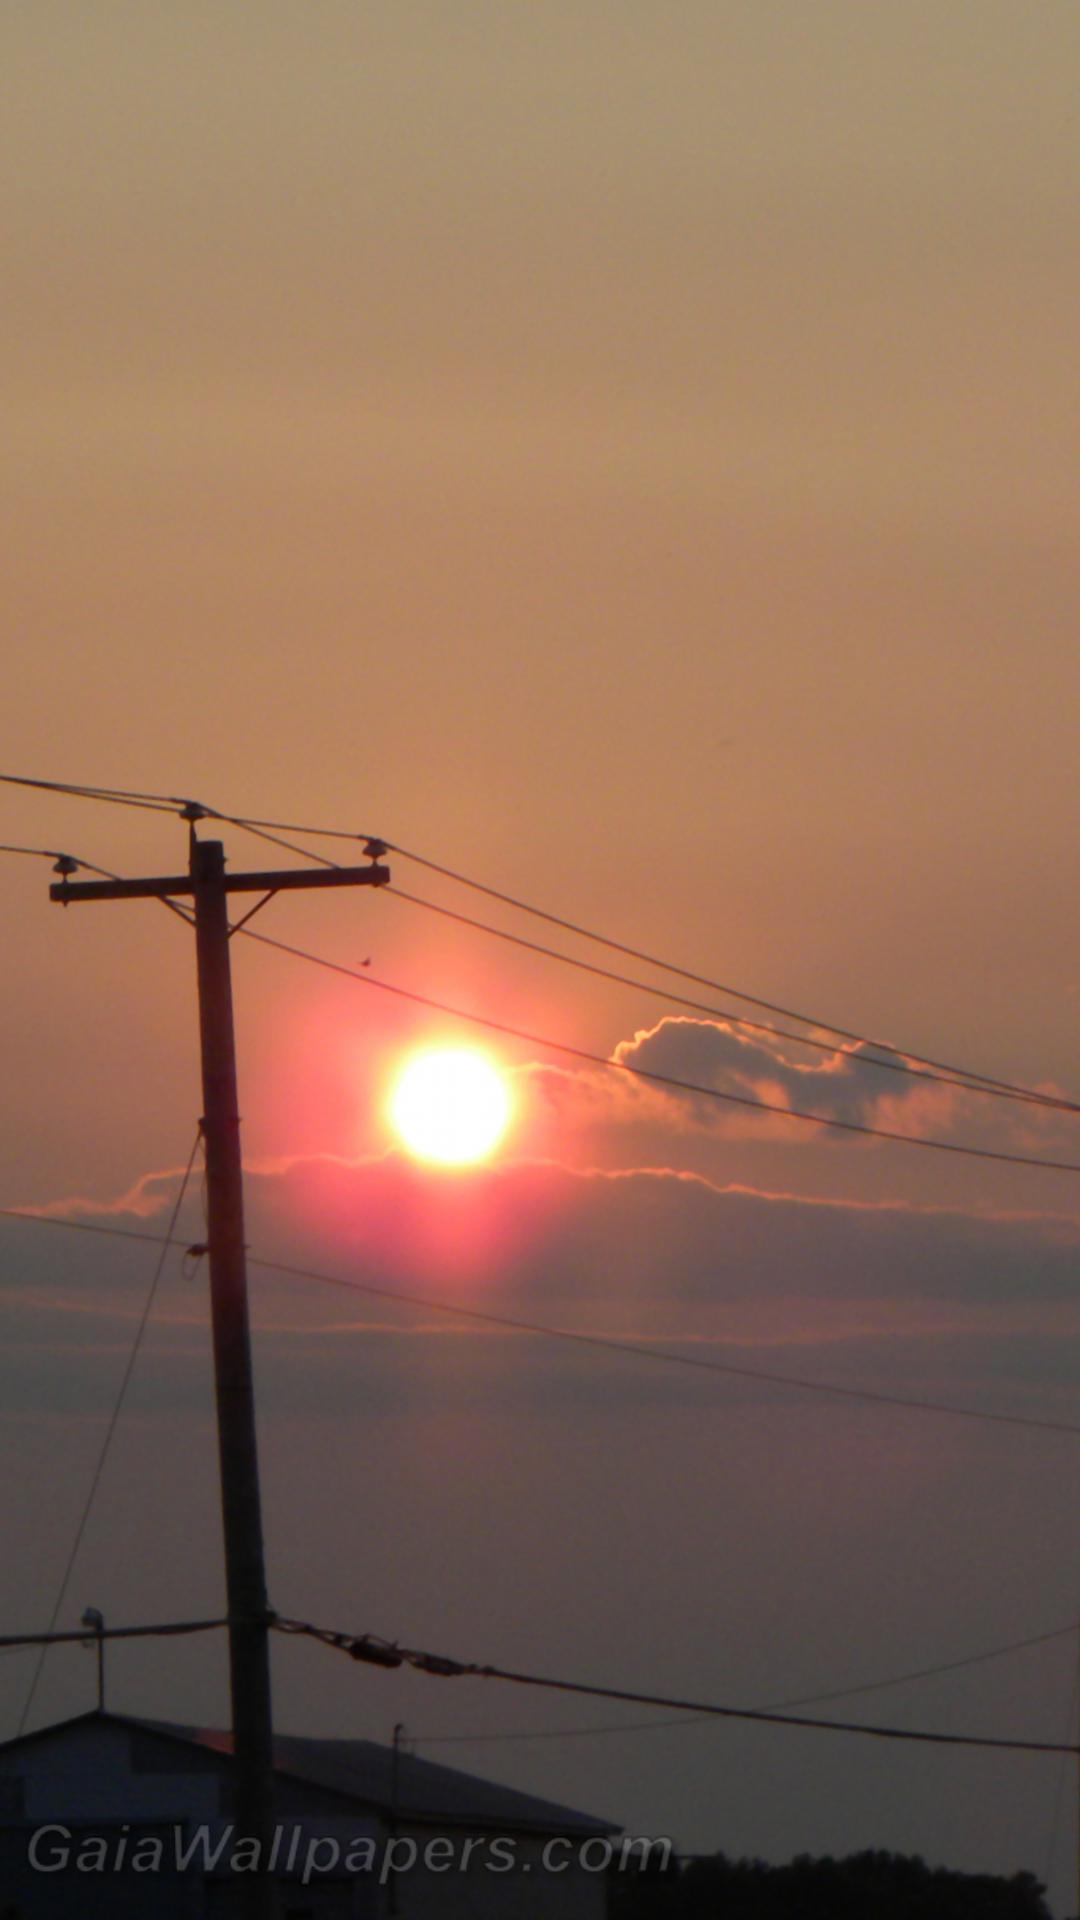 Sunset above the power lines - Free desktop wallpapers